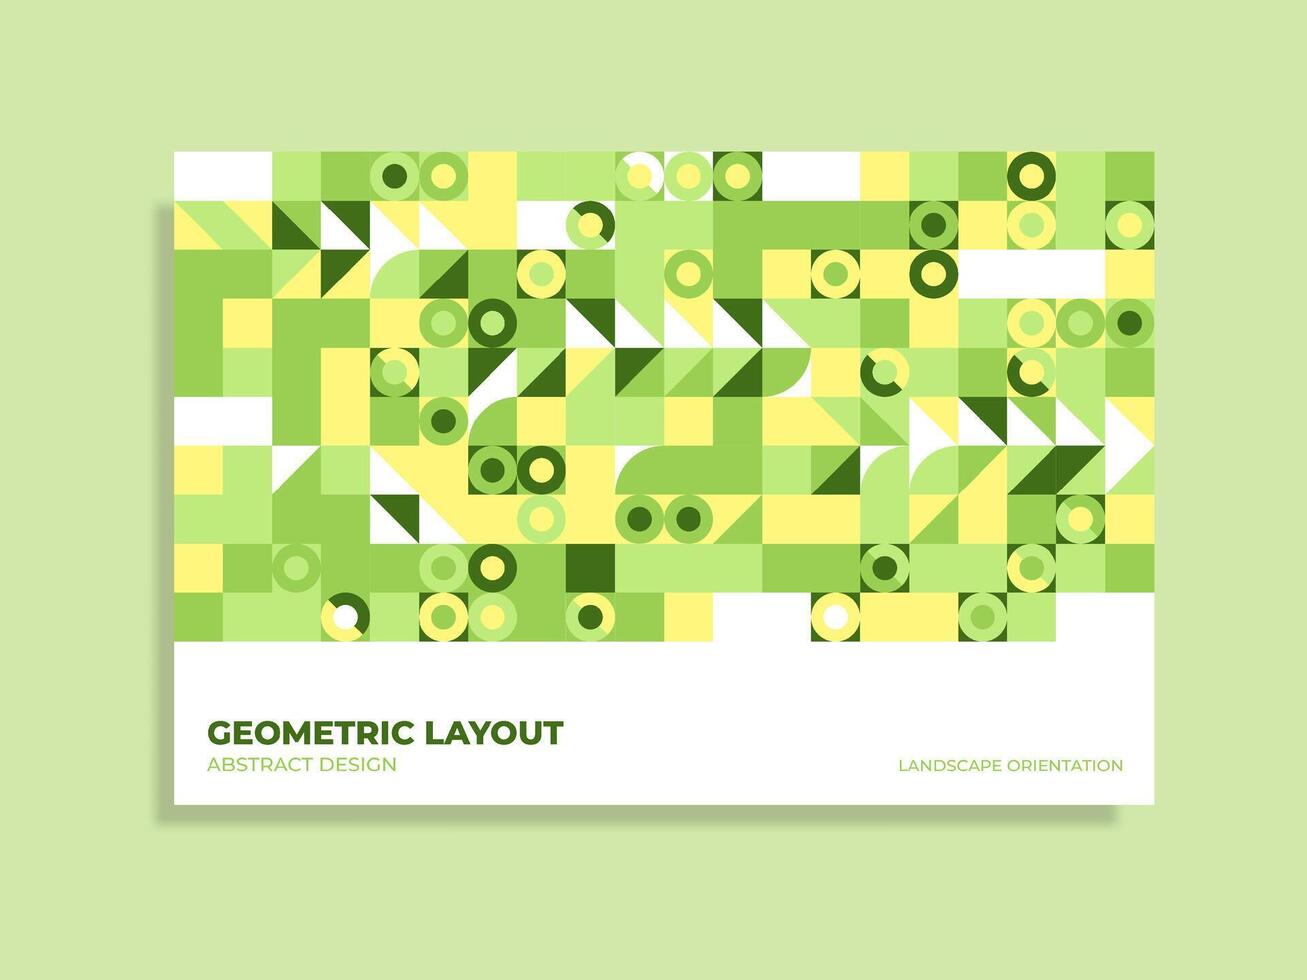 abstract achtergrond lay-out vector